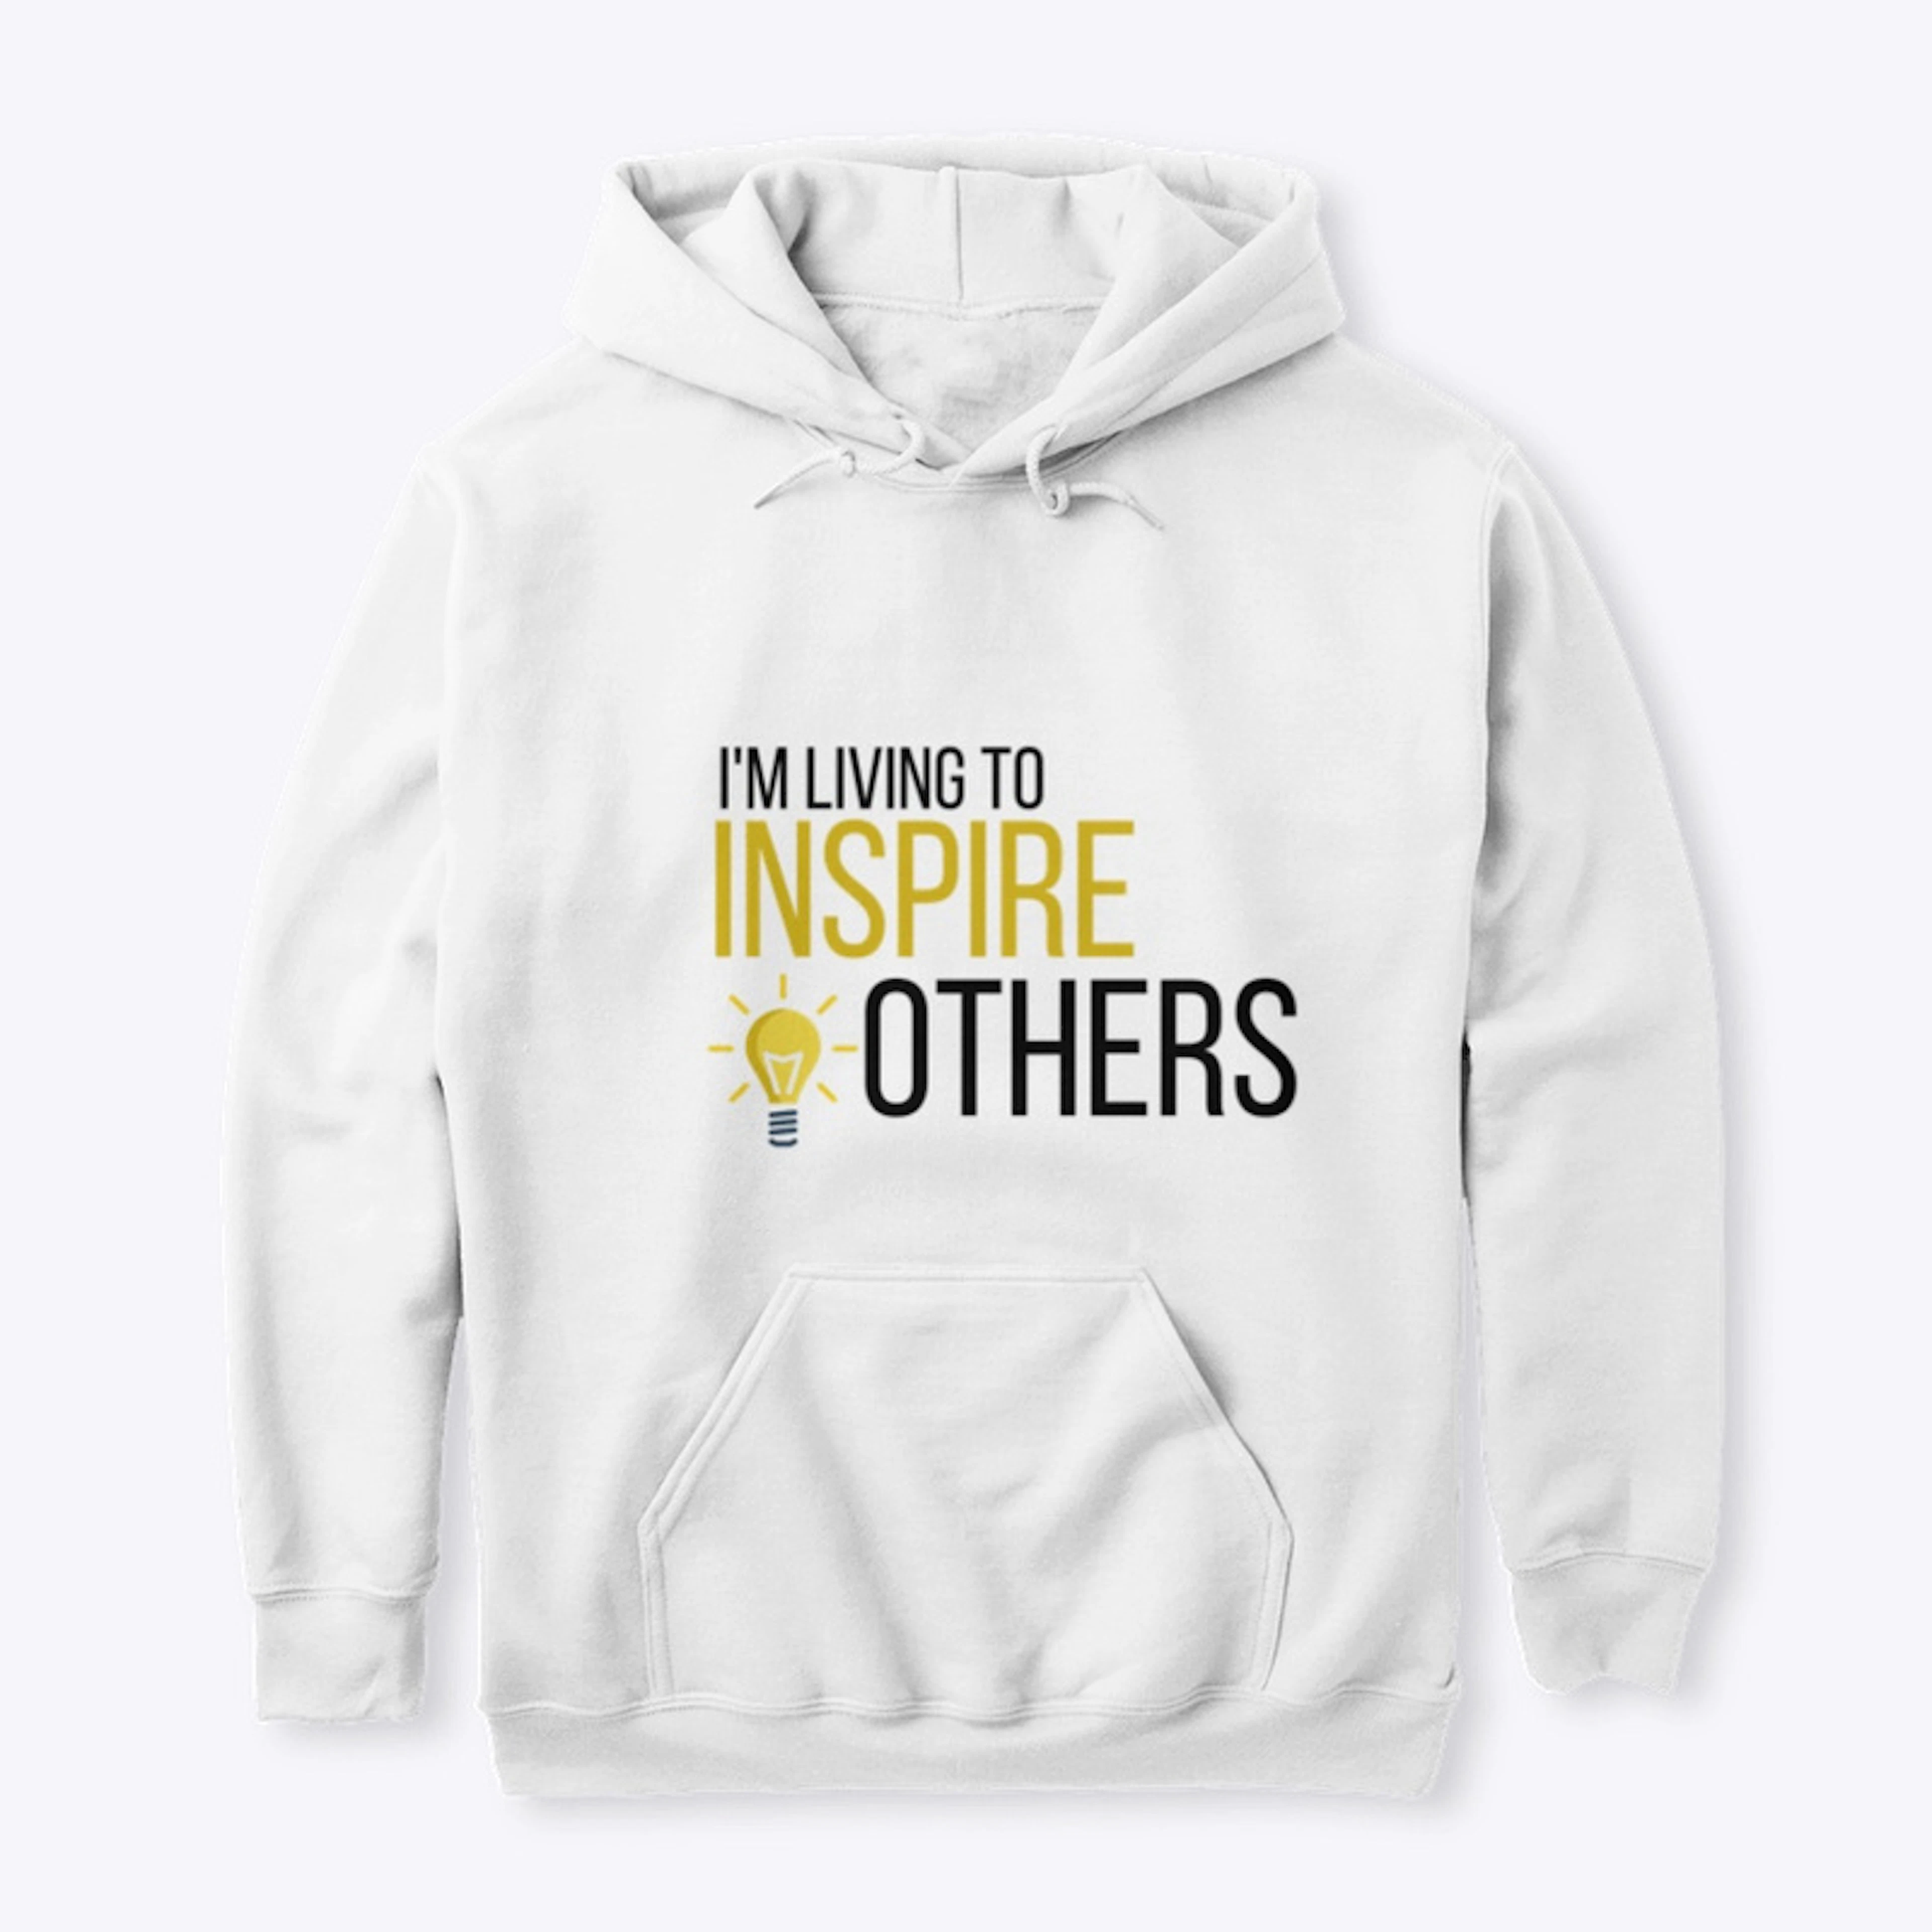 INSPIRE OTHERS (WHITE)